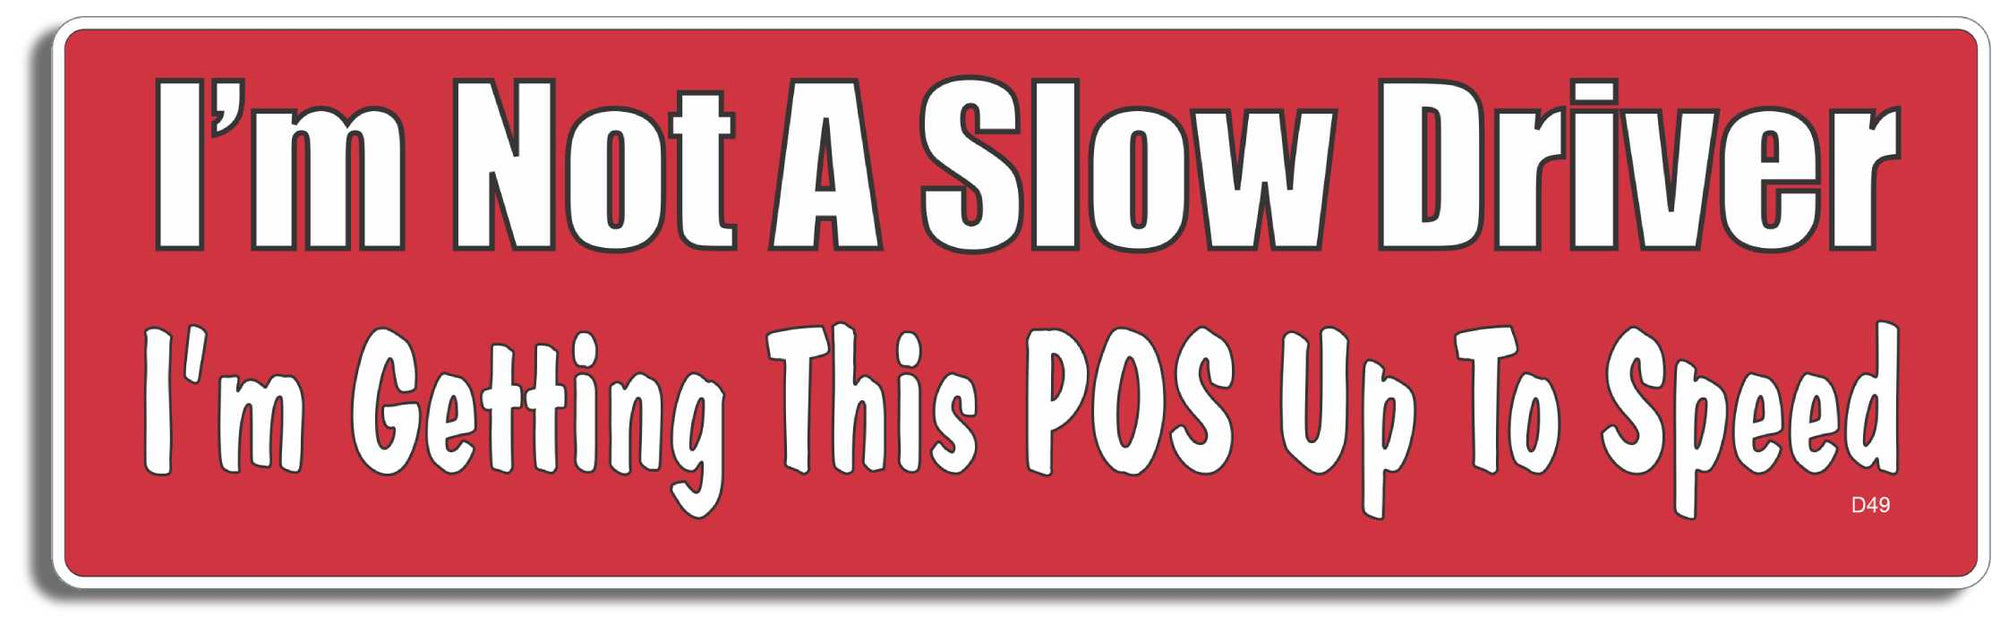 I'm Not A Slow Driver I'm Getting This POS Up To Speed -  3" x 10" Bumper Sticker--Car Magnet- -  Decal Bumper Sticker-funny Bumper Sticker Car Magnet I'm Not A Slow Driver I'm Getting-  Decal for cars funny bumper sticker, funny quote, funny quotes